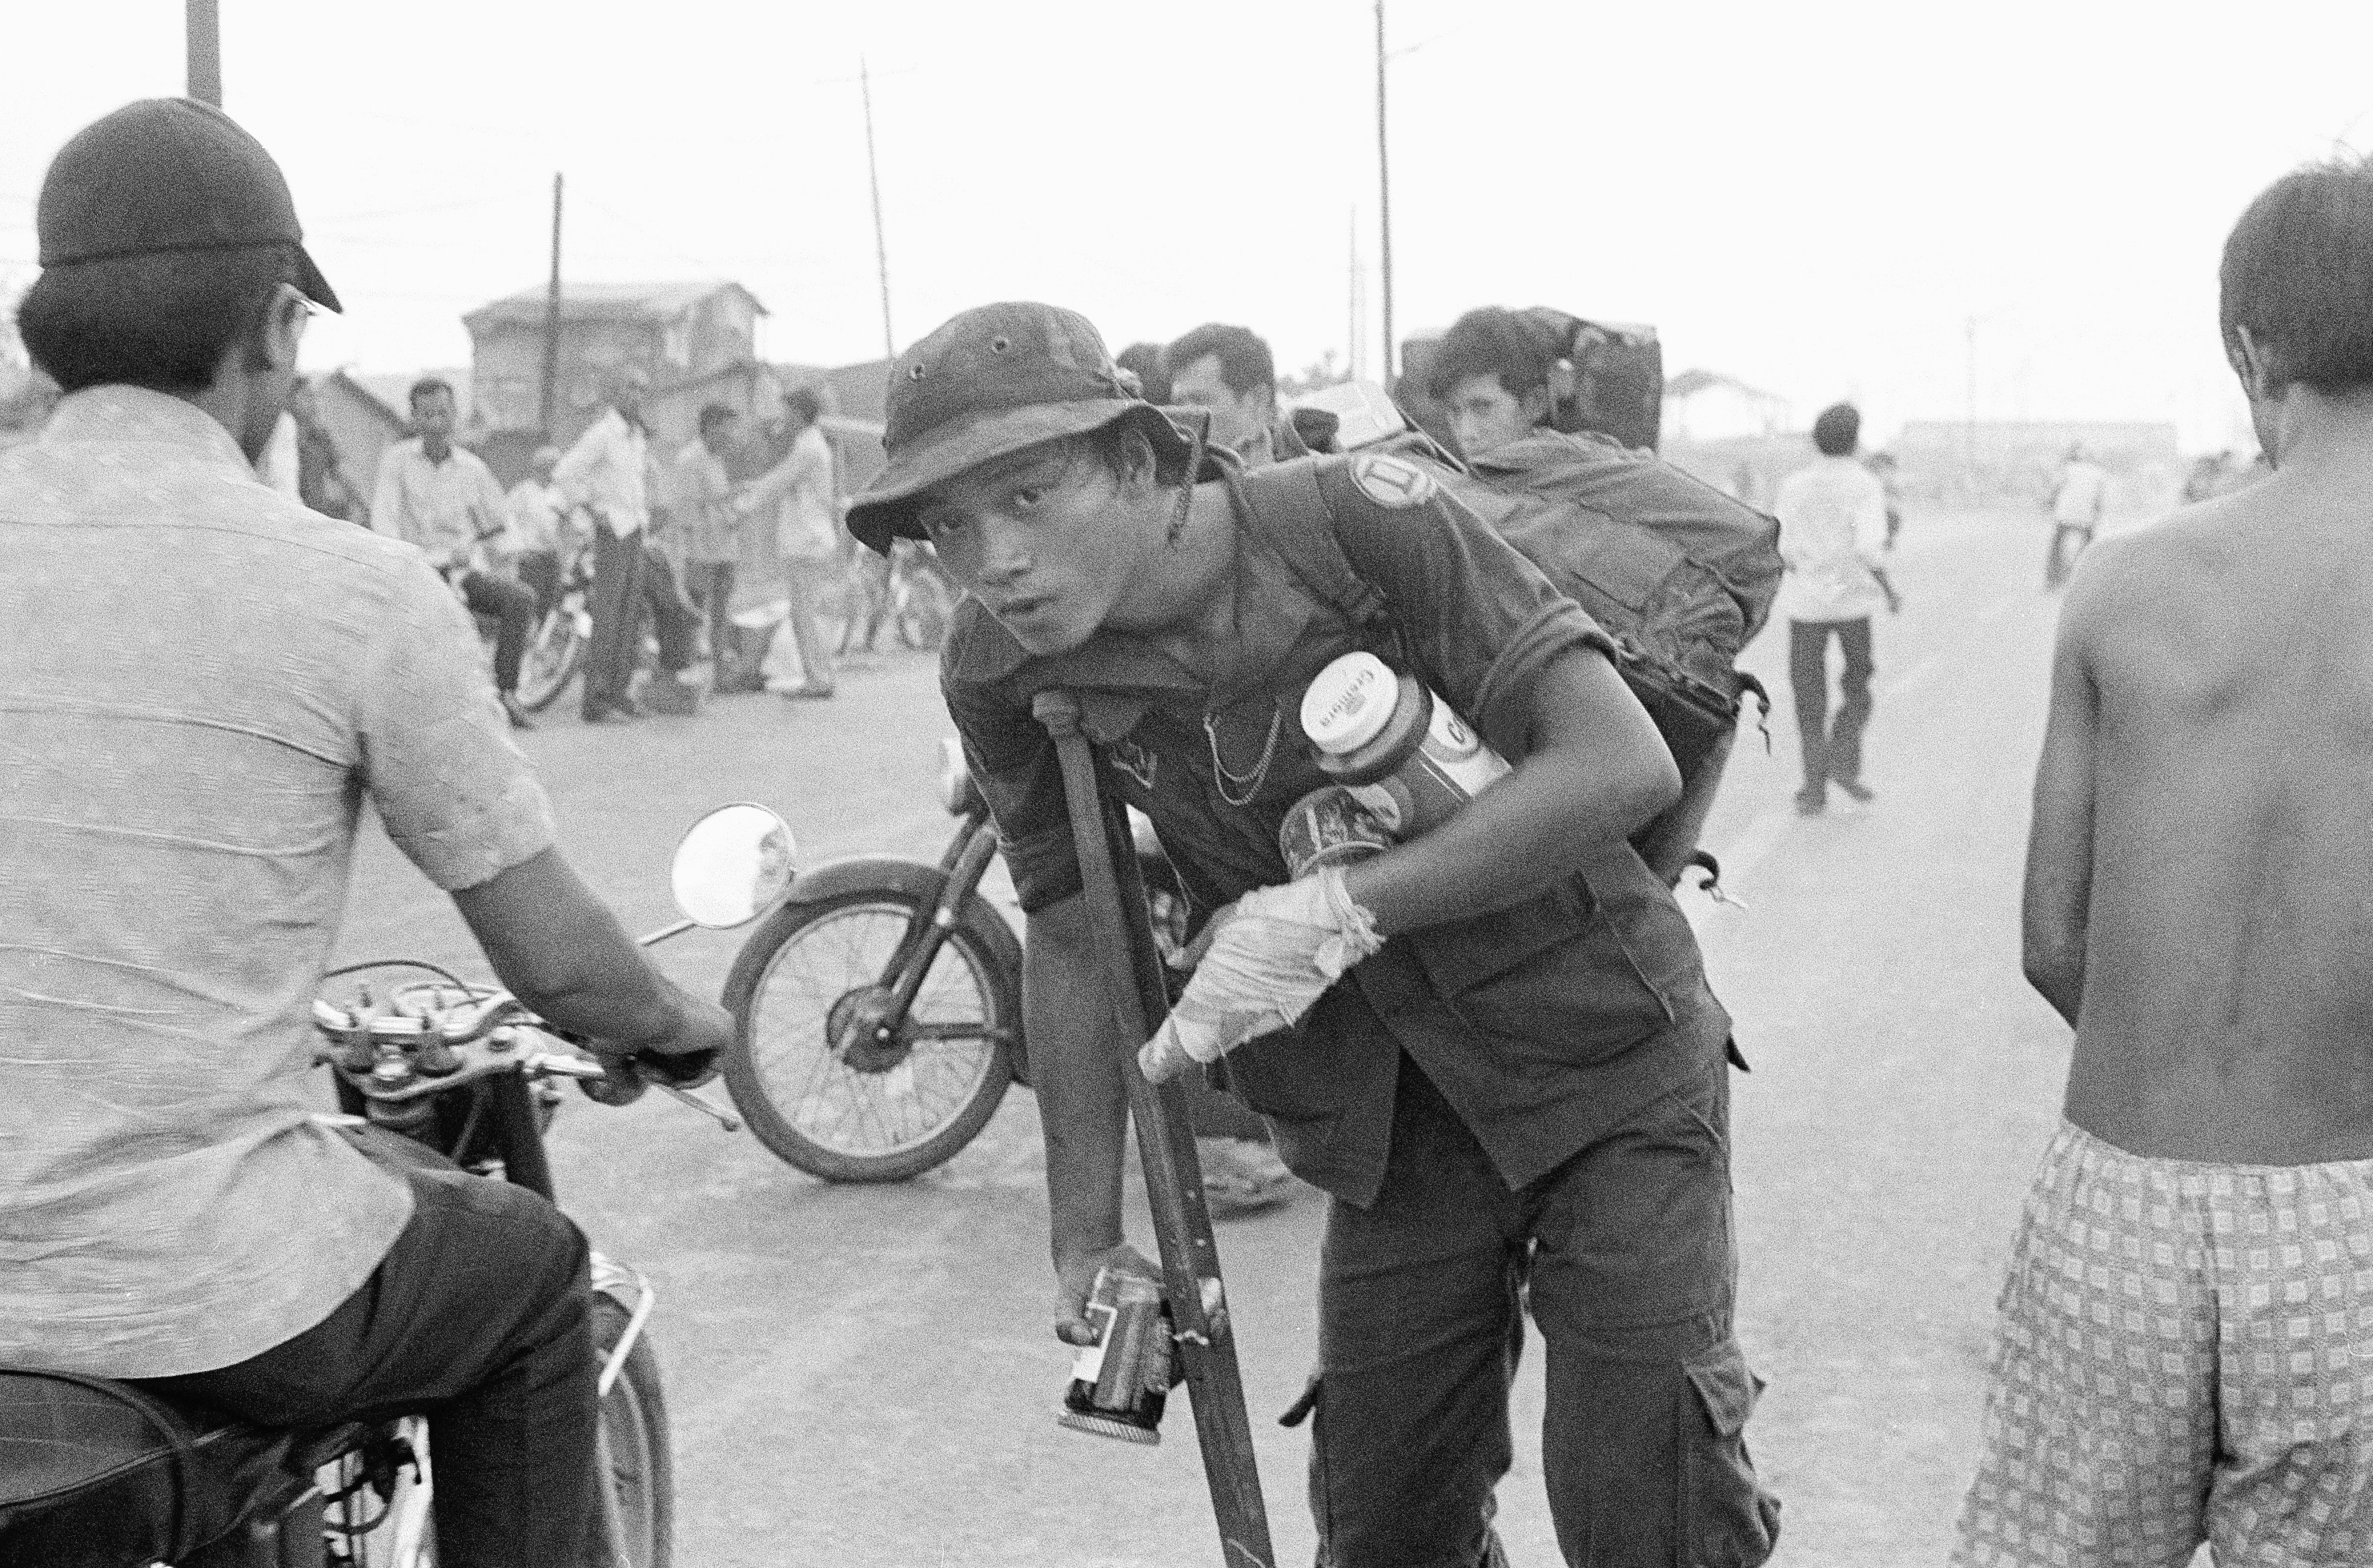 A South Vietnamese war veteran limps away on crutch with food looted from abandoned U.S. installations after evacuation of Saigon, April 29, 1975. (AP Photo)